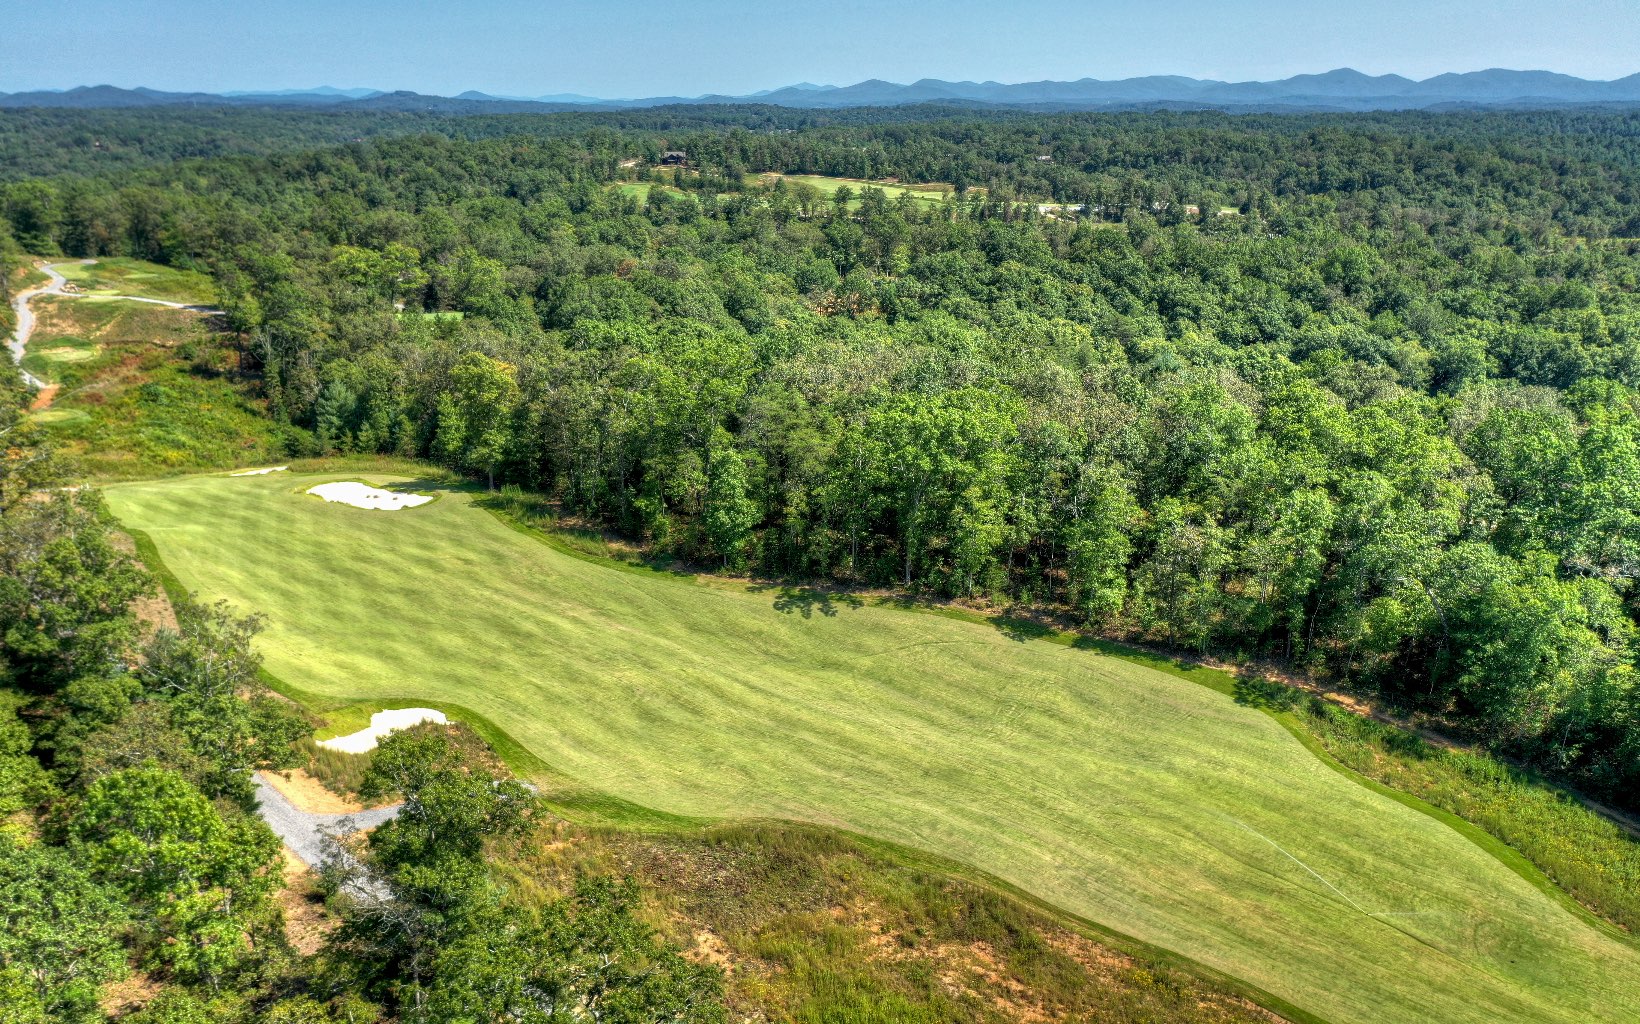 Be home on the fairway of Old Toccoa Farm, the most illustrious golf course in North Georgia. Lot 142 is one of the most premier lots in this Golf Digest award nominated community. Enjoy beautiful brunches and exclusive wine dinners for members only at the newly built clubhouse and restaurant, or play a round of golf alongside the Toccoa River. This homesite offers 4,000 feet of deeded river access, all underground utilities, high speed internet, paved roads, and 24 hour guarded gate. With custom home plans already available—saving months of planning—this lot is ready to build your dream home in the most well designed lifestyle communities in Blue Ridge. We have also designed a pet-friendly side yard for every member of your family! This is the hole-in-one you’ve been dreaming about. For video, please text Listing Agent at 404-984-5990.